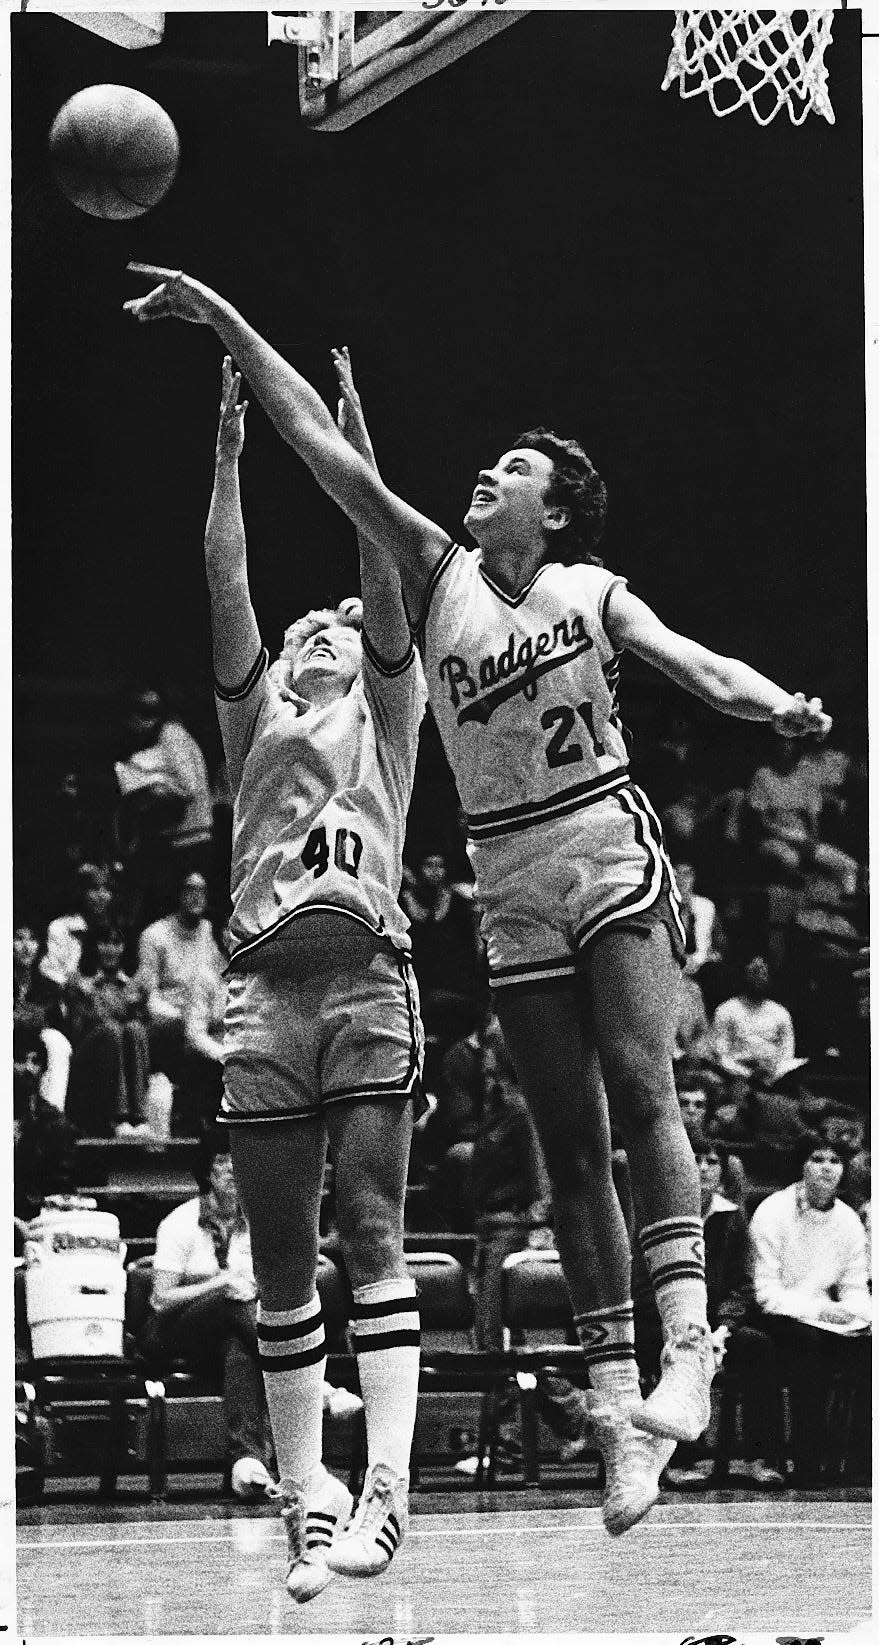 Theresa Huff  (21) blocks a shot during one of the 118 games she played for the University of Wisconsin from 1979-83.